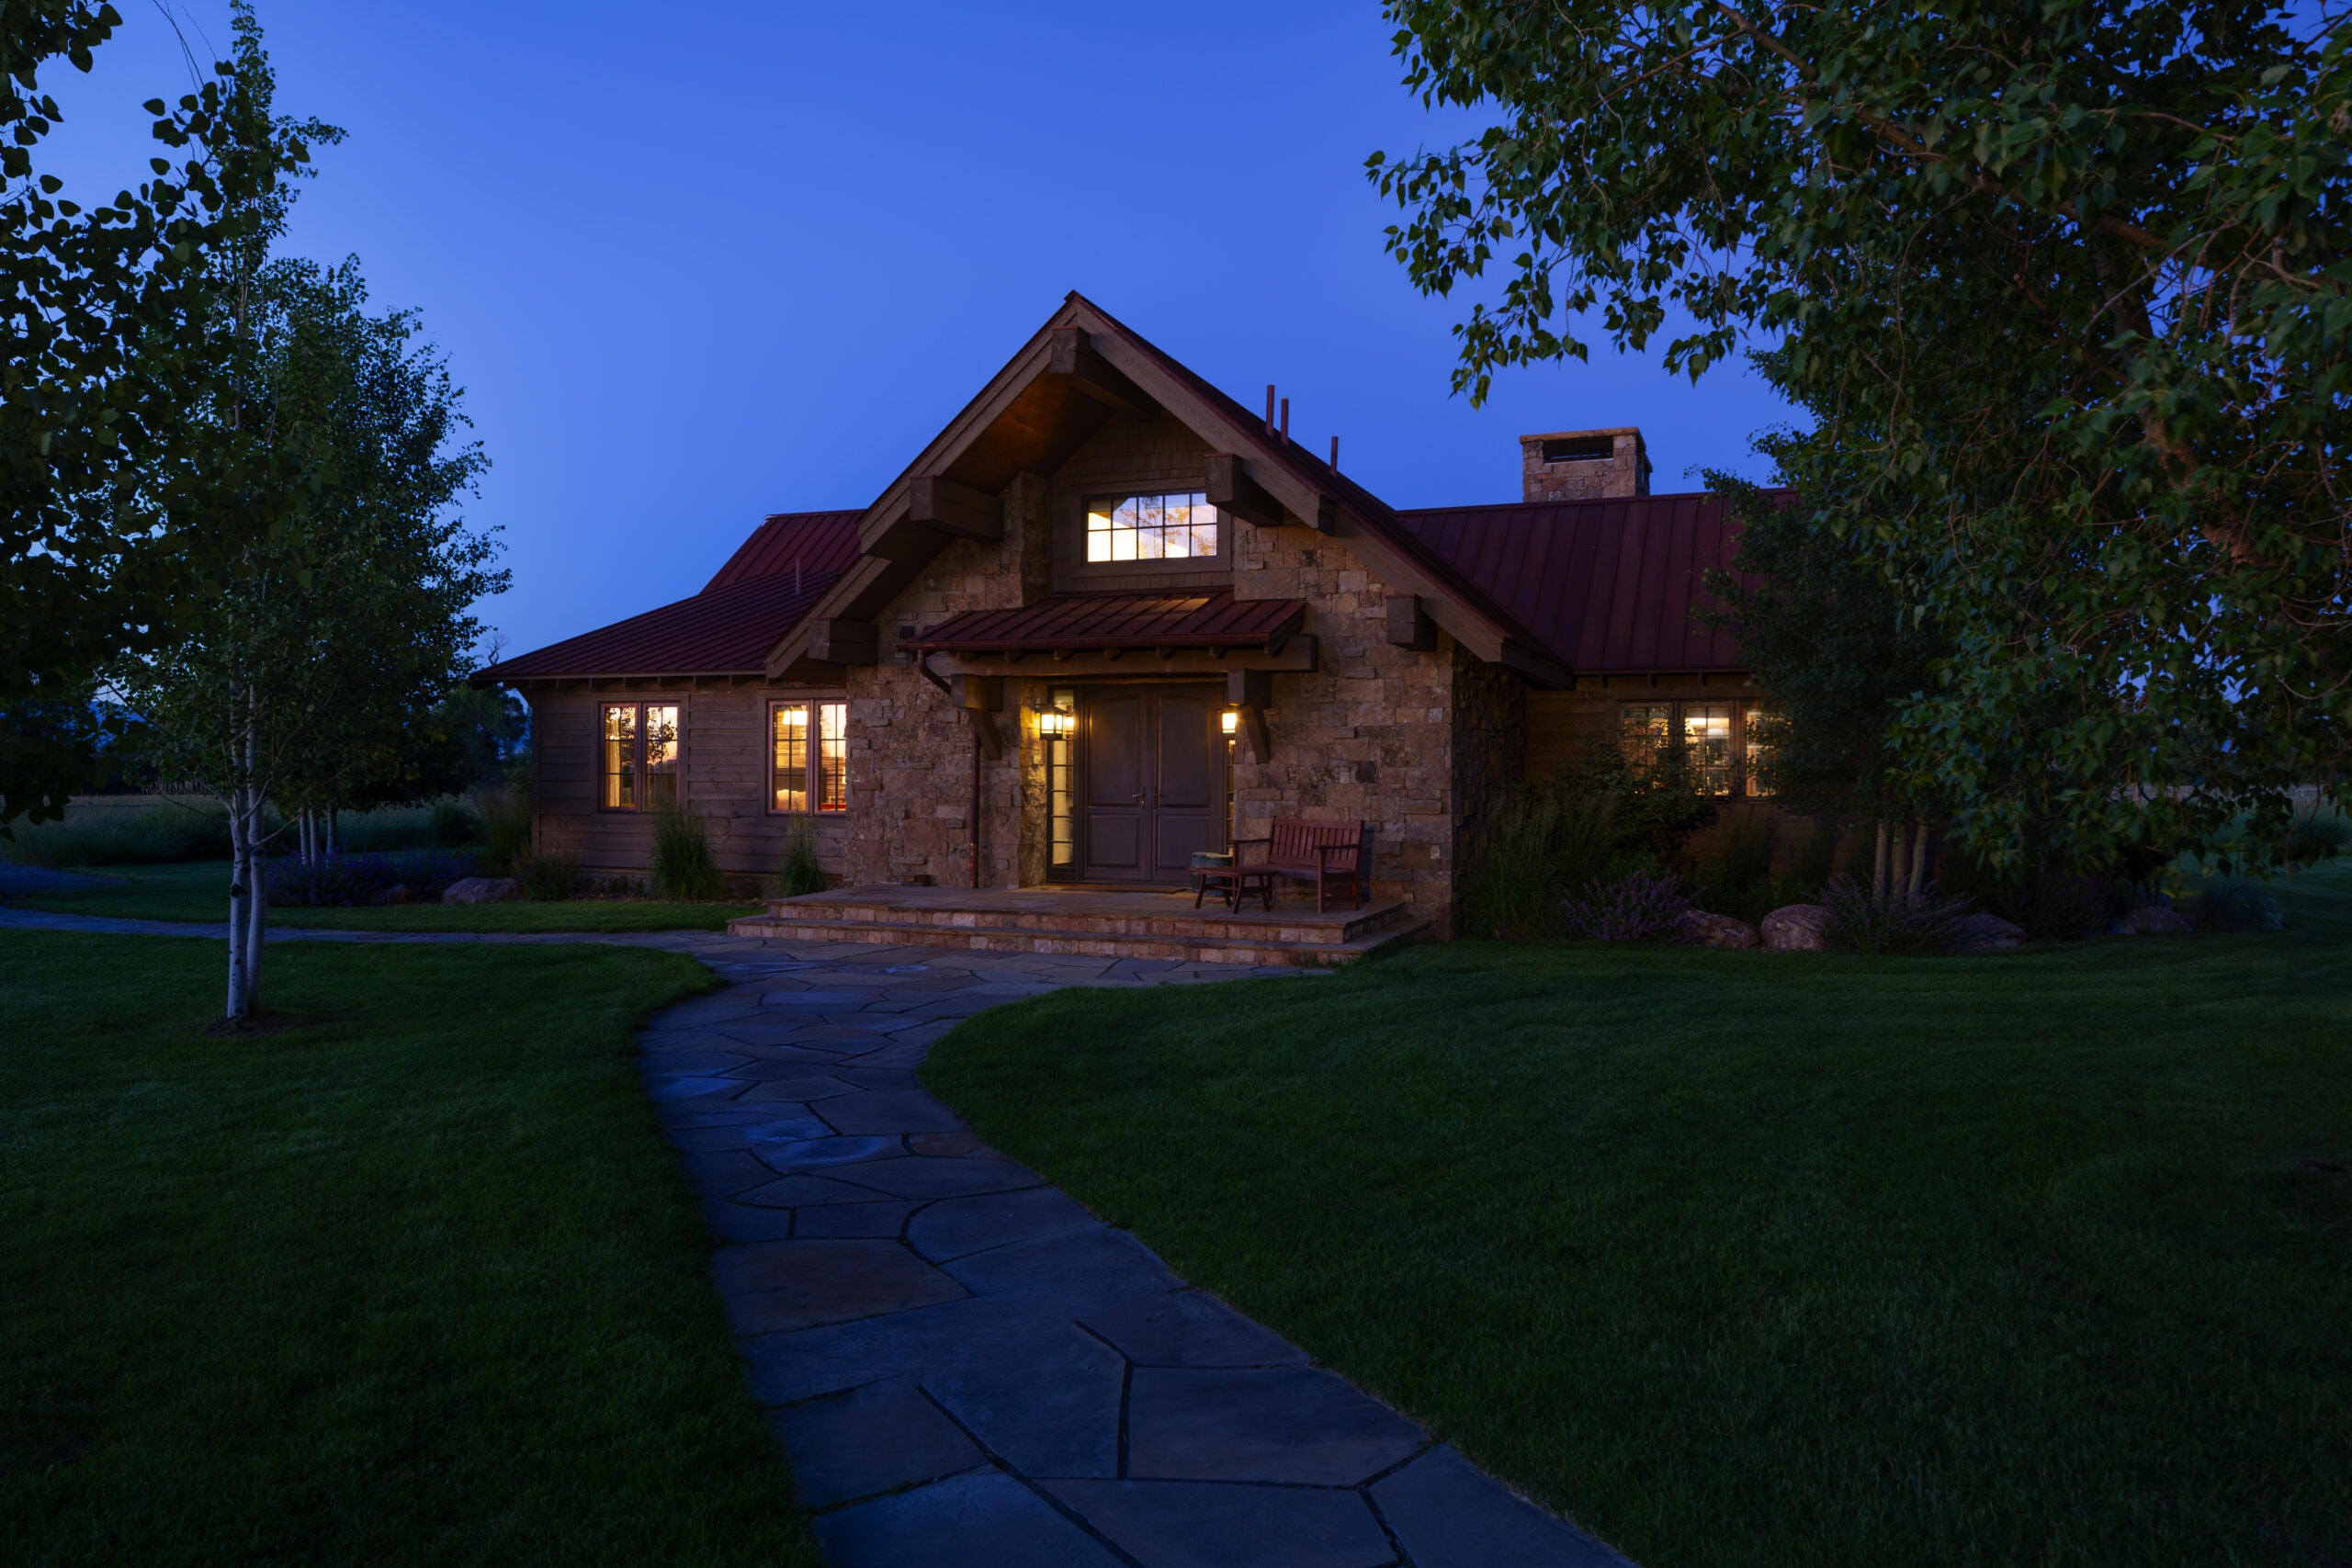 Gallatin Valley Guest House, Mountain Architecture, Rustic home